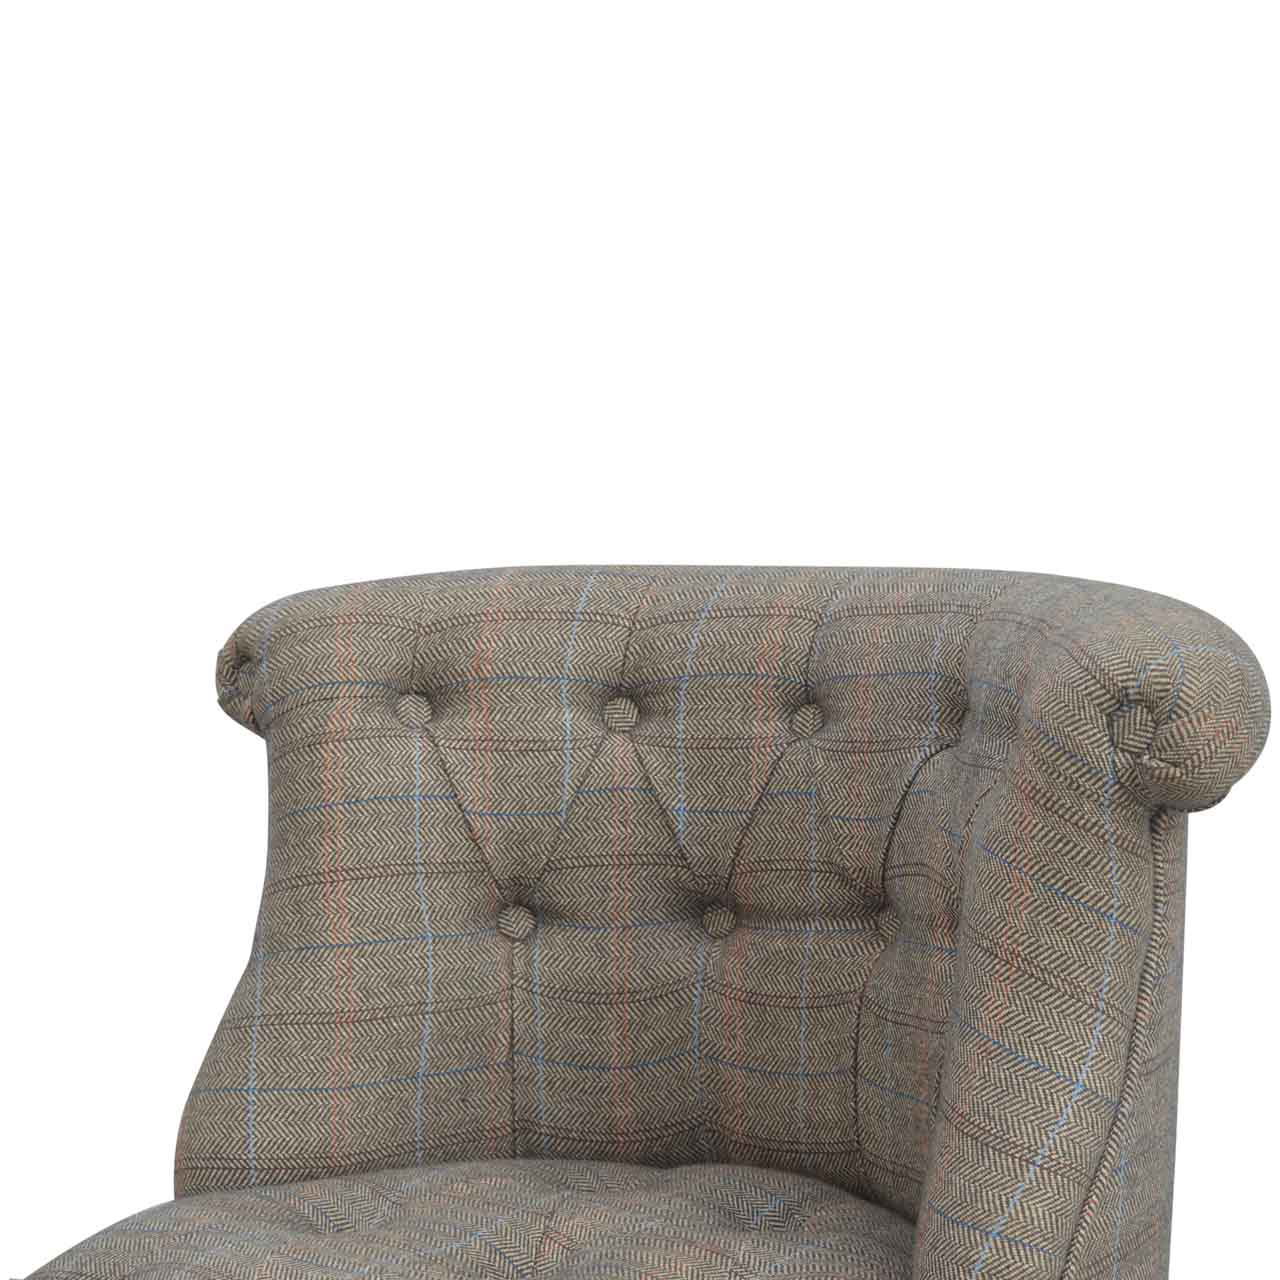 Small Multi Tweed Accent Chair by Artisan Furniture